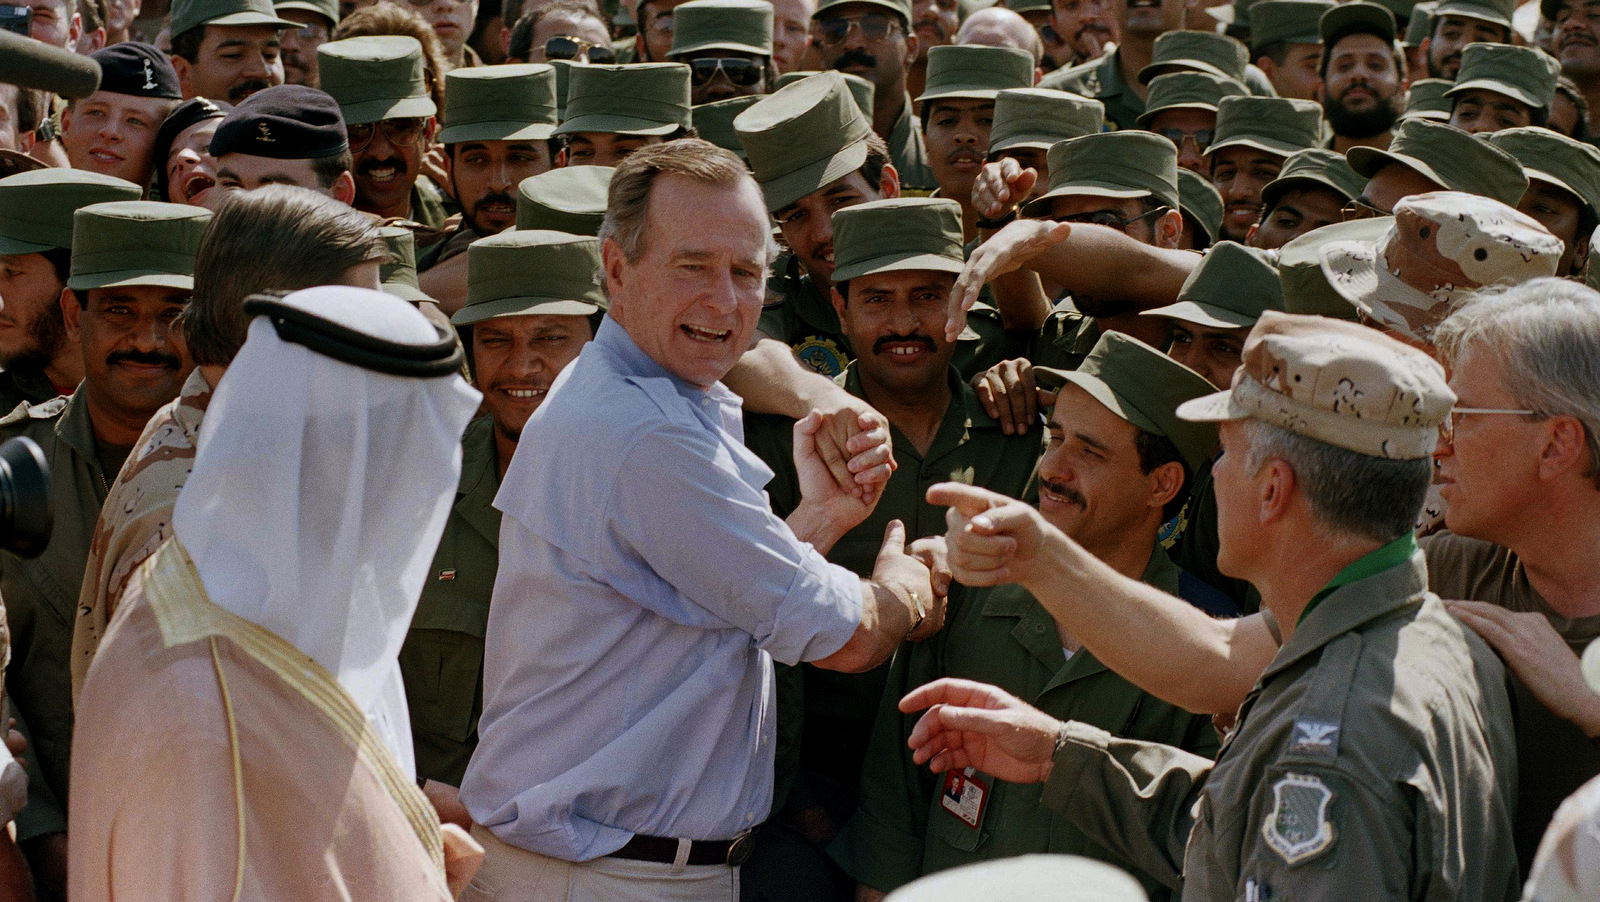 President George Bush is greeted by Saudi troops and others as he arrives in Dhahran, Saudi Arabia, for a Thanksgiving visit, Nov. 22, 1990. J. Scott Applewhite | AP